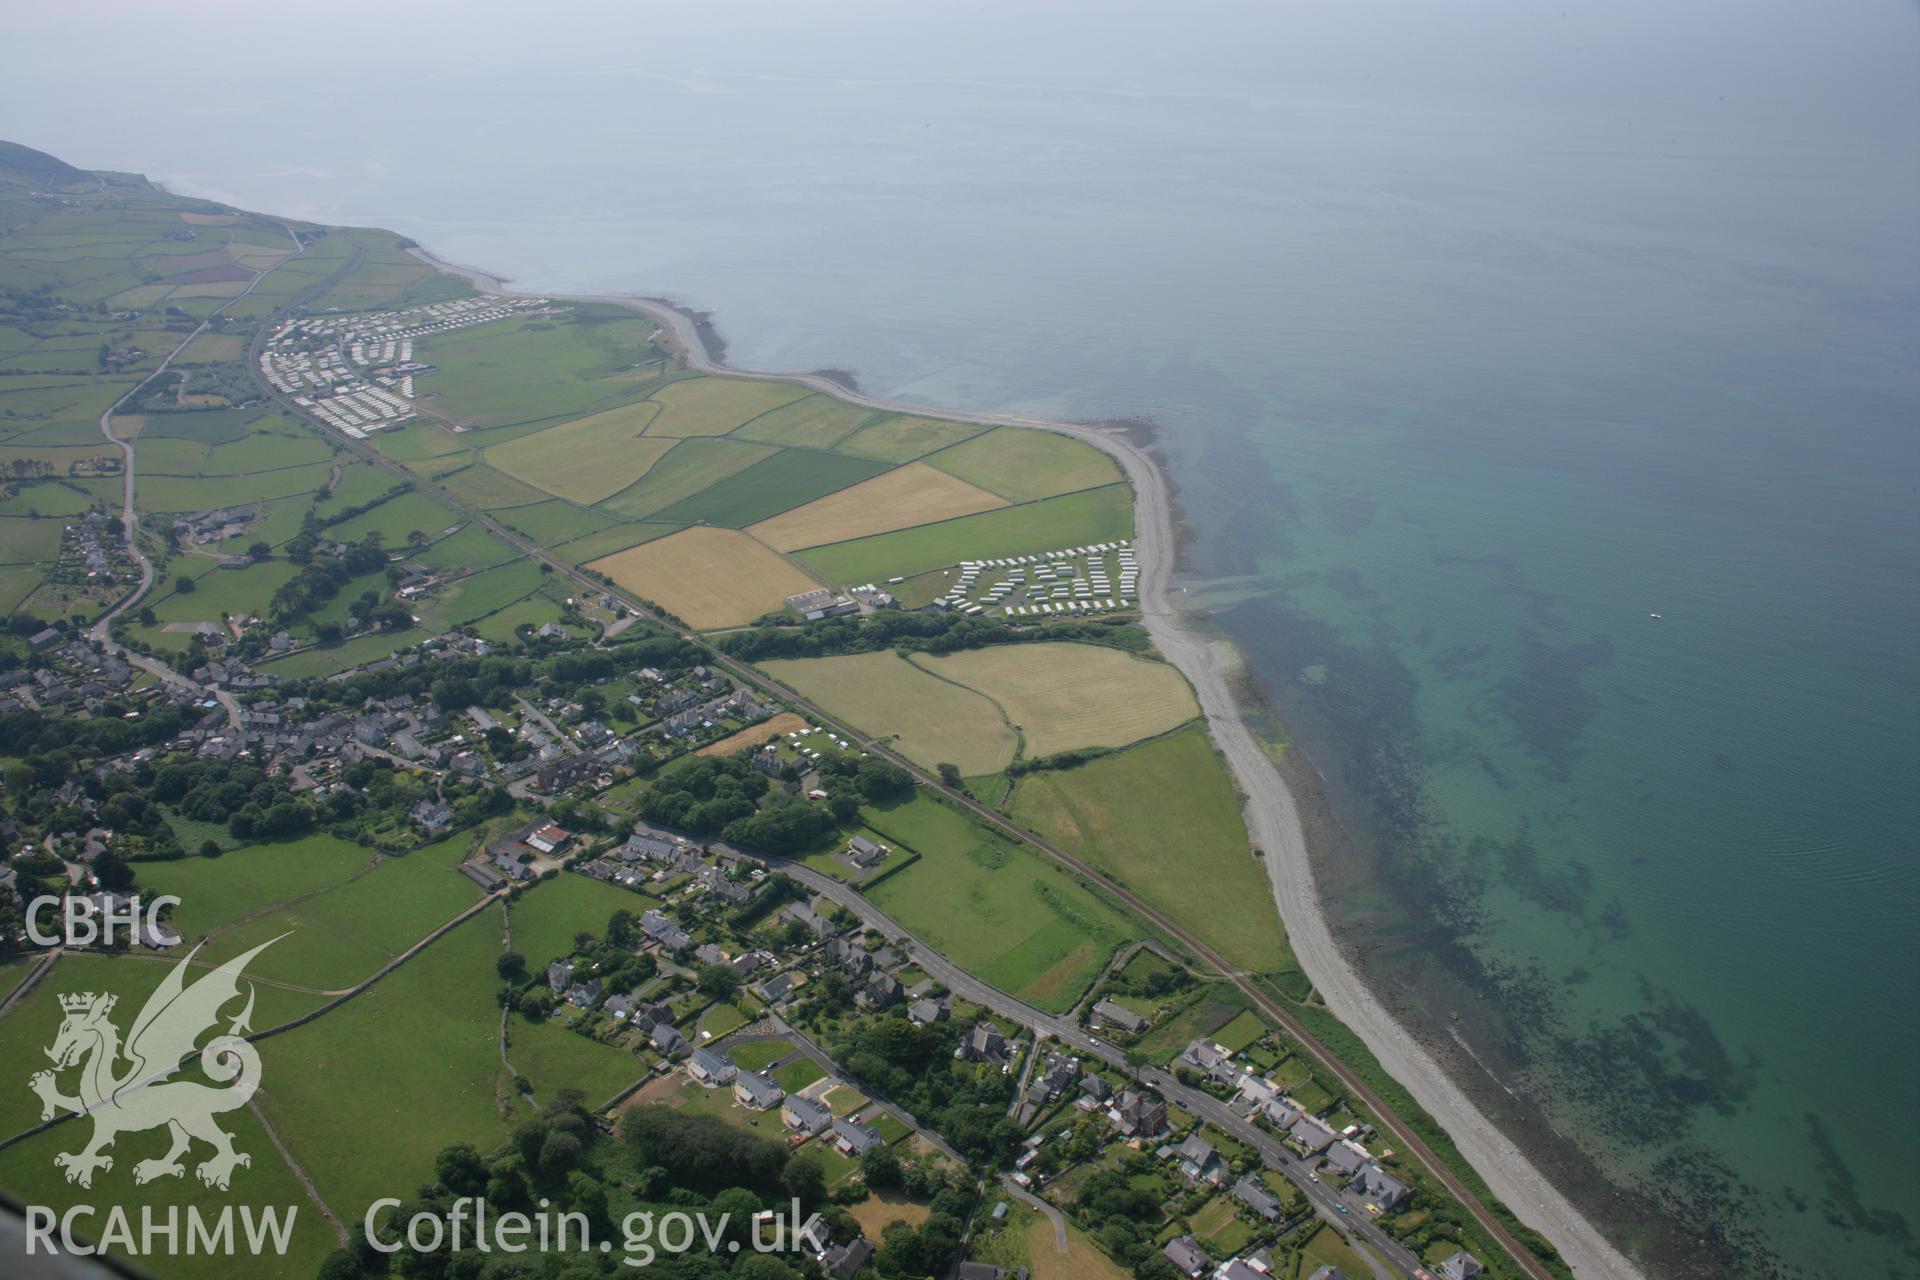 RCAHMW colour oblique aerial photograph of Llwyngwril. Taken on 04 July 2006 by Toby Driver.